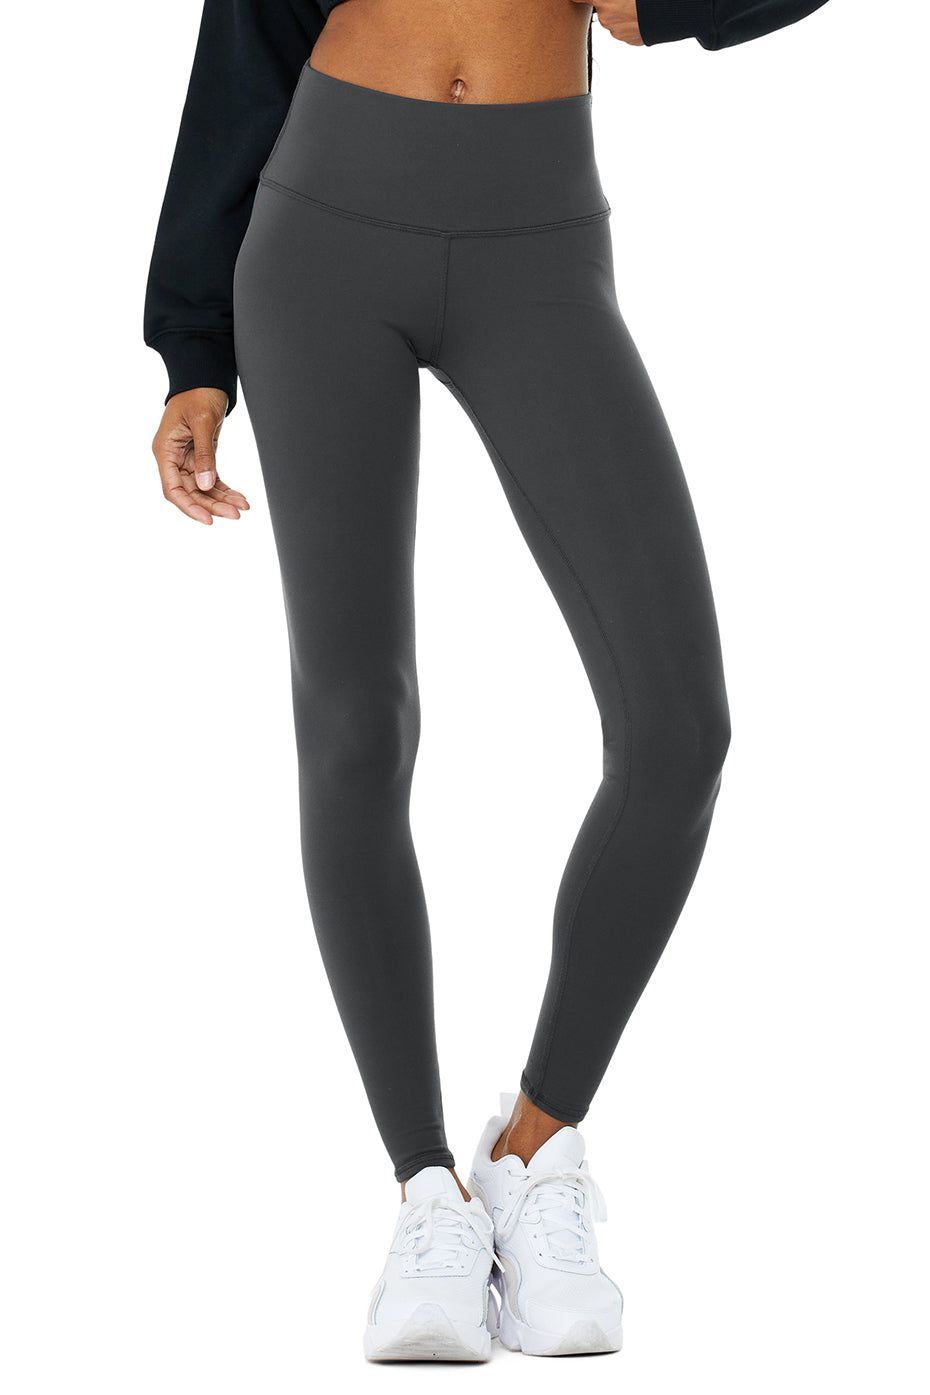 Fleece-Lined Winter Leggings Extra Warm - lovovo gifts